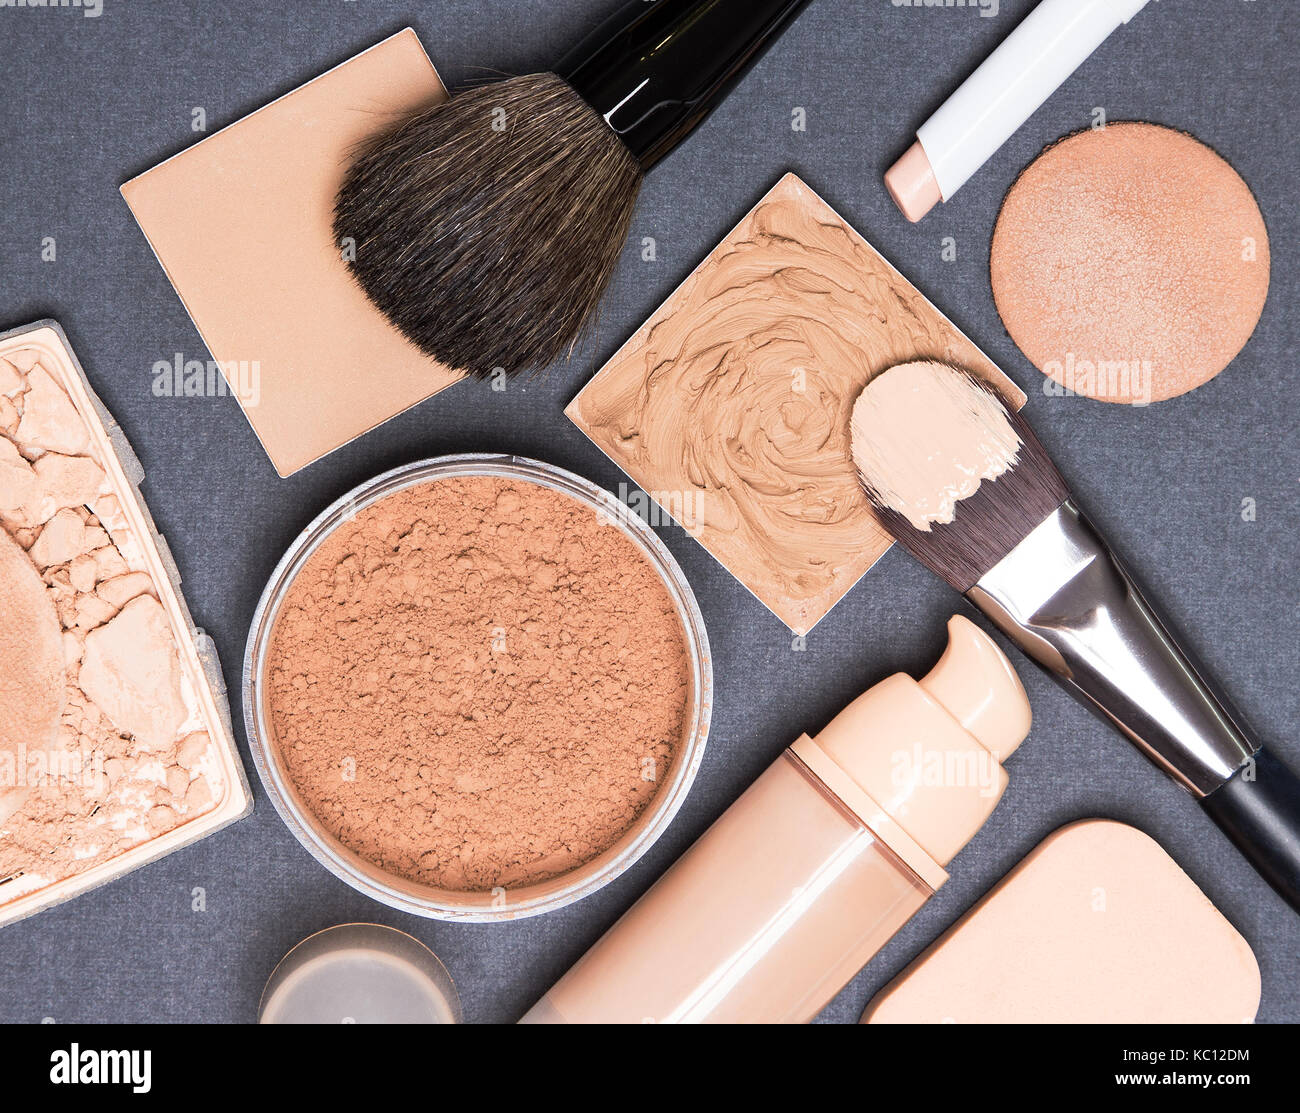 Close-up of concealer pencil, corrector, open liquid foundation bottle and jar of loose powder, crushed compact powder, makeup brushes and sponges Stock Photo